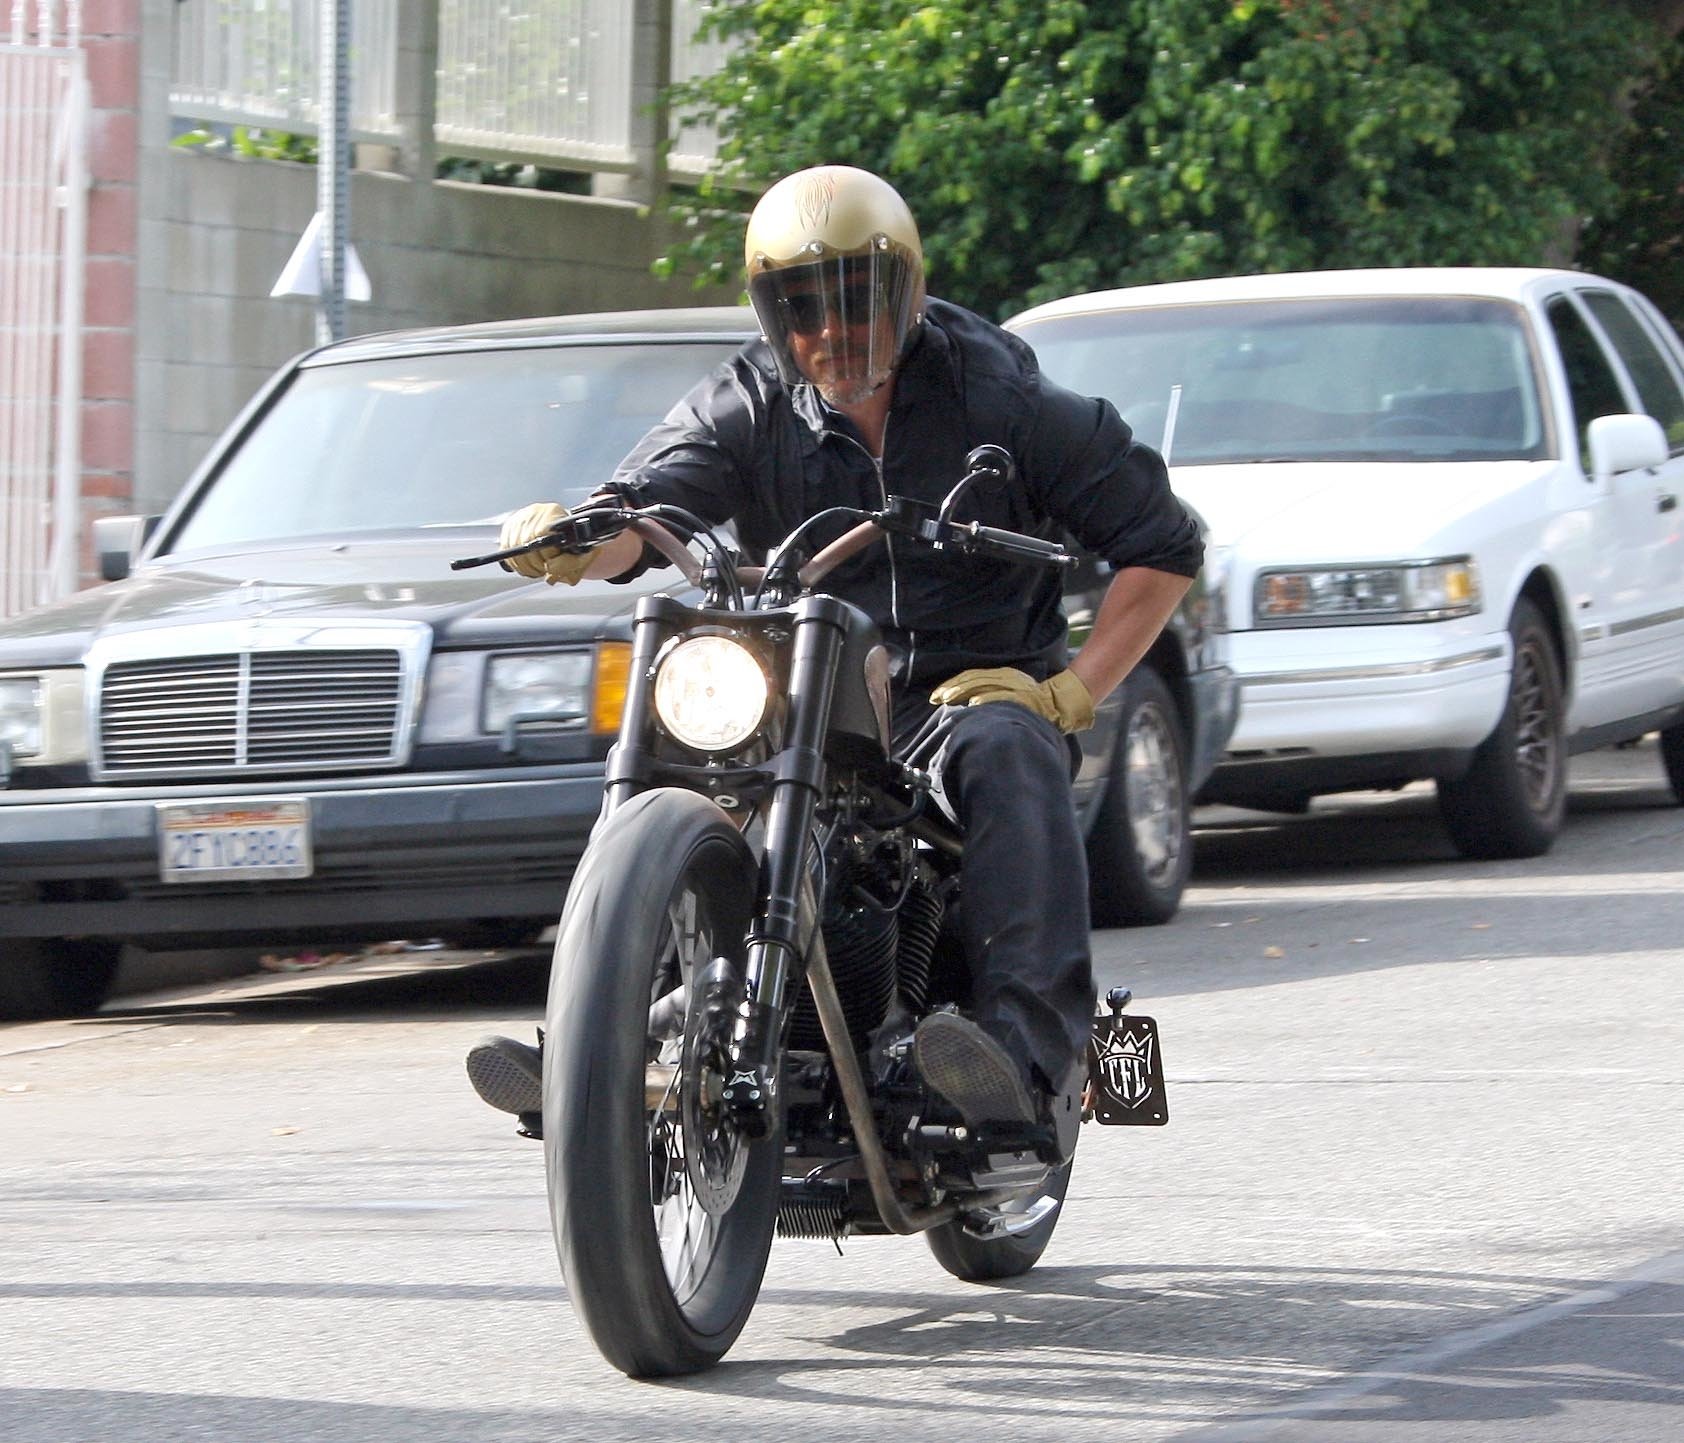 Brad Pitt’s $300k Motorcycle Is One of the Most Powerful Bikes in the World